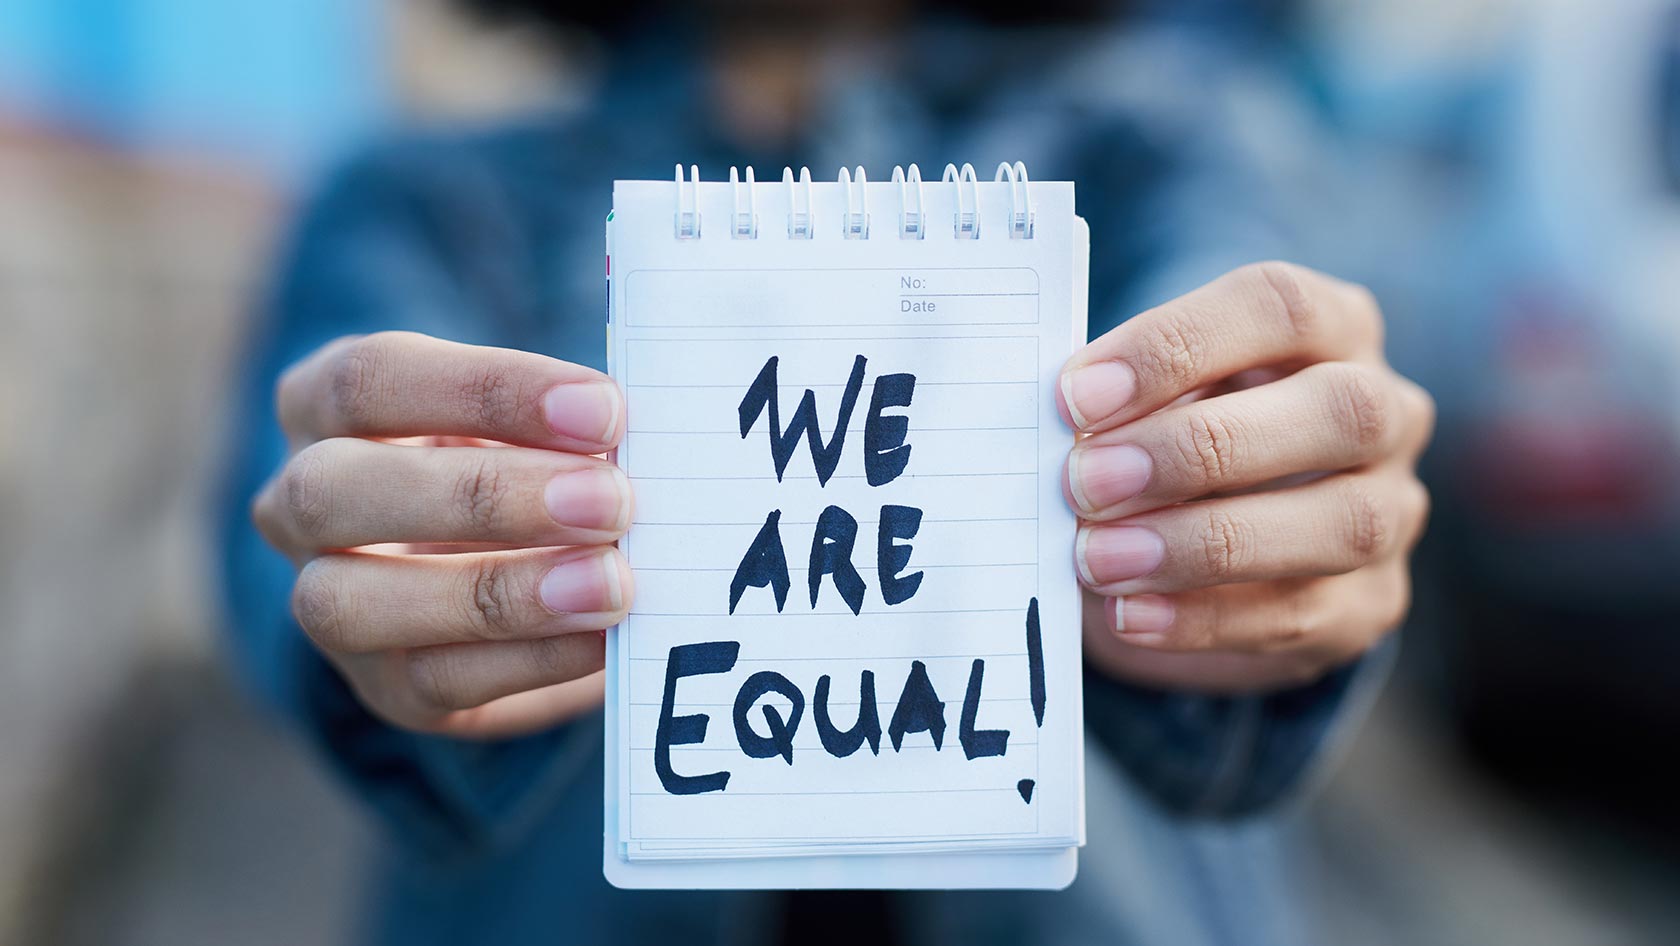 Notice "We are equal!"